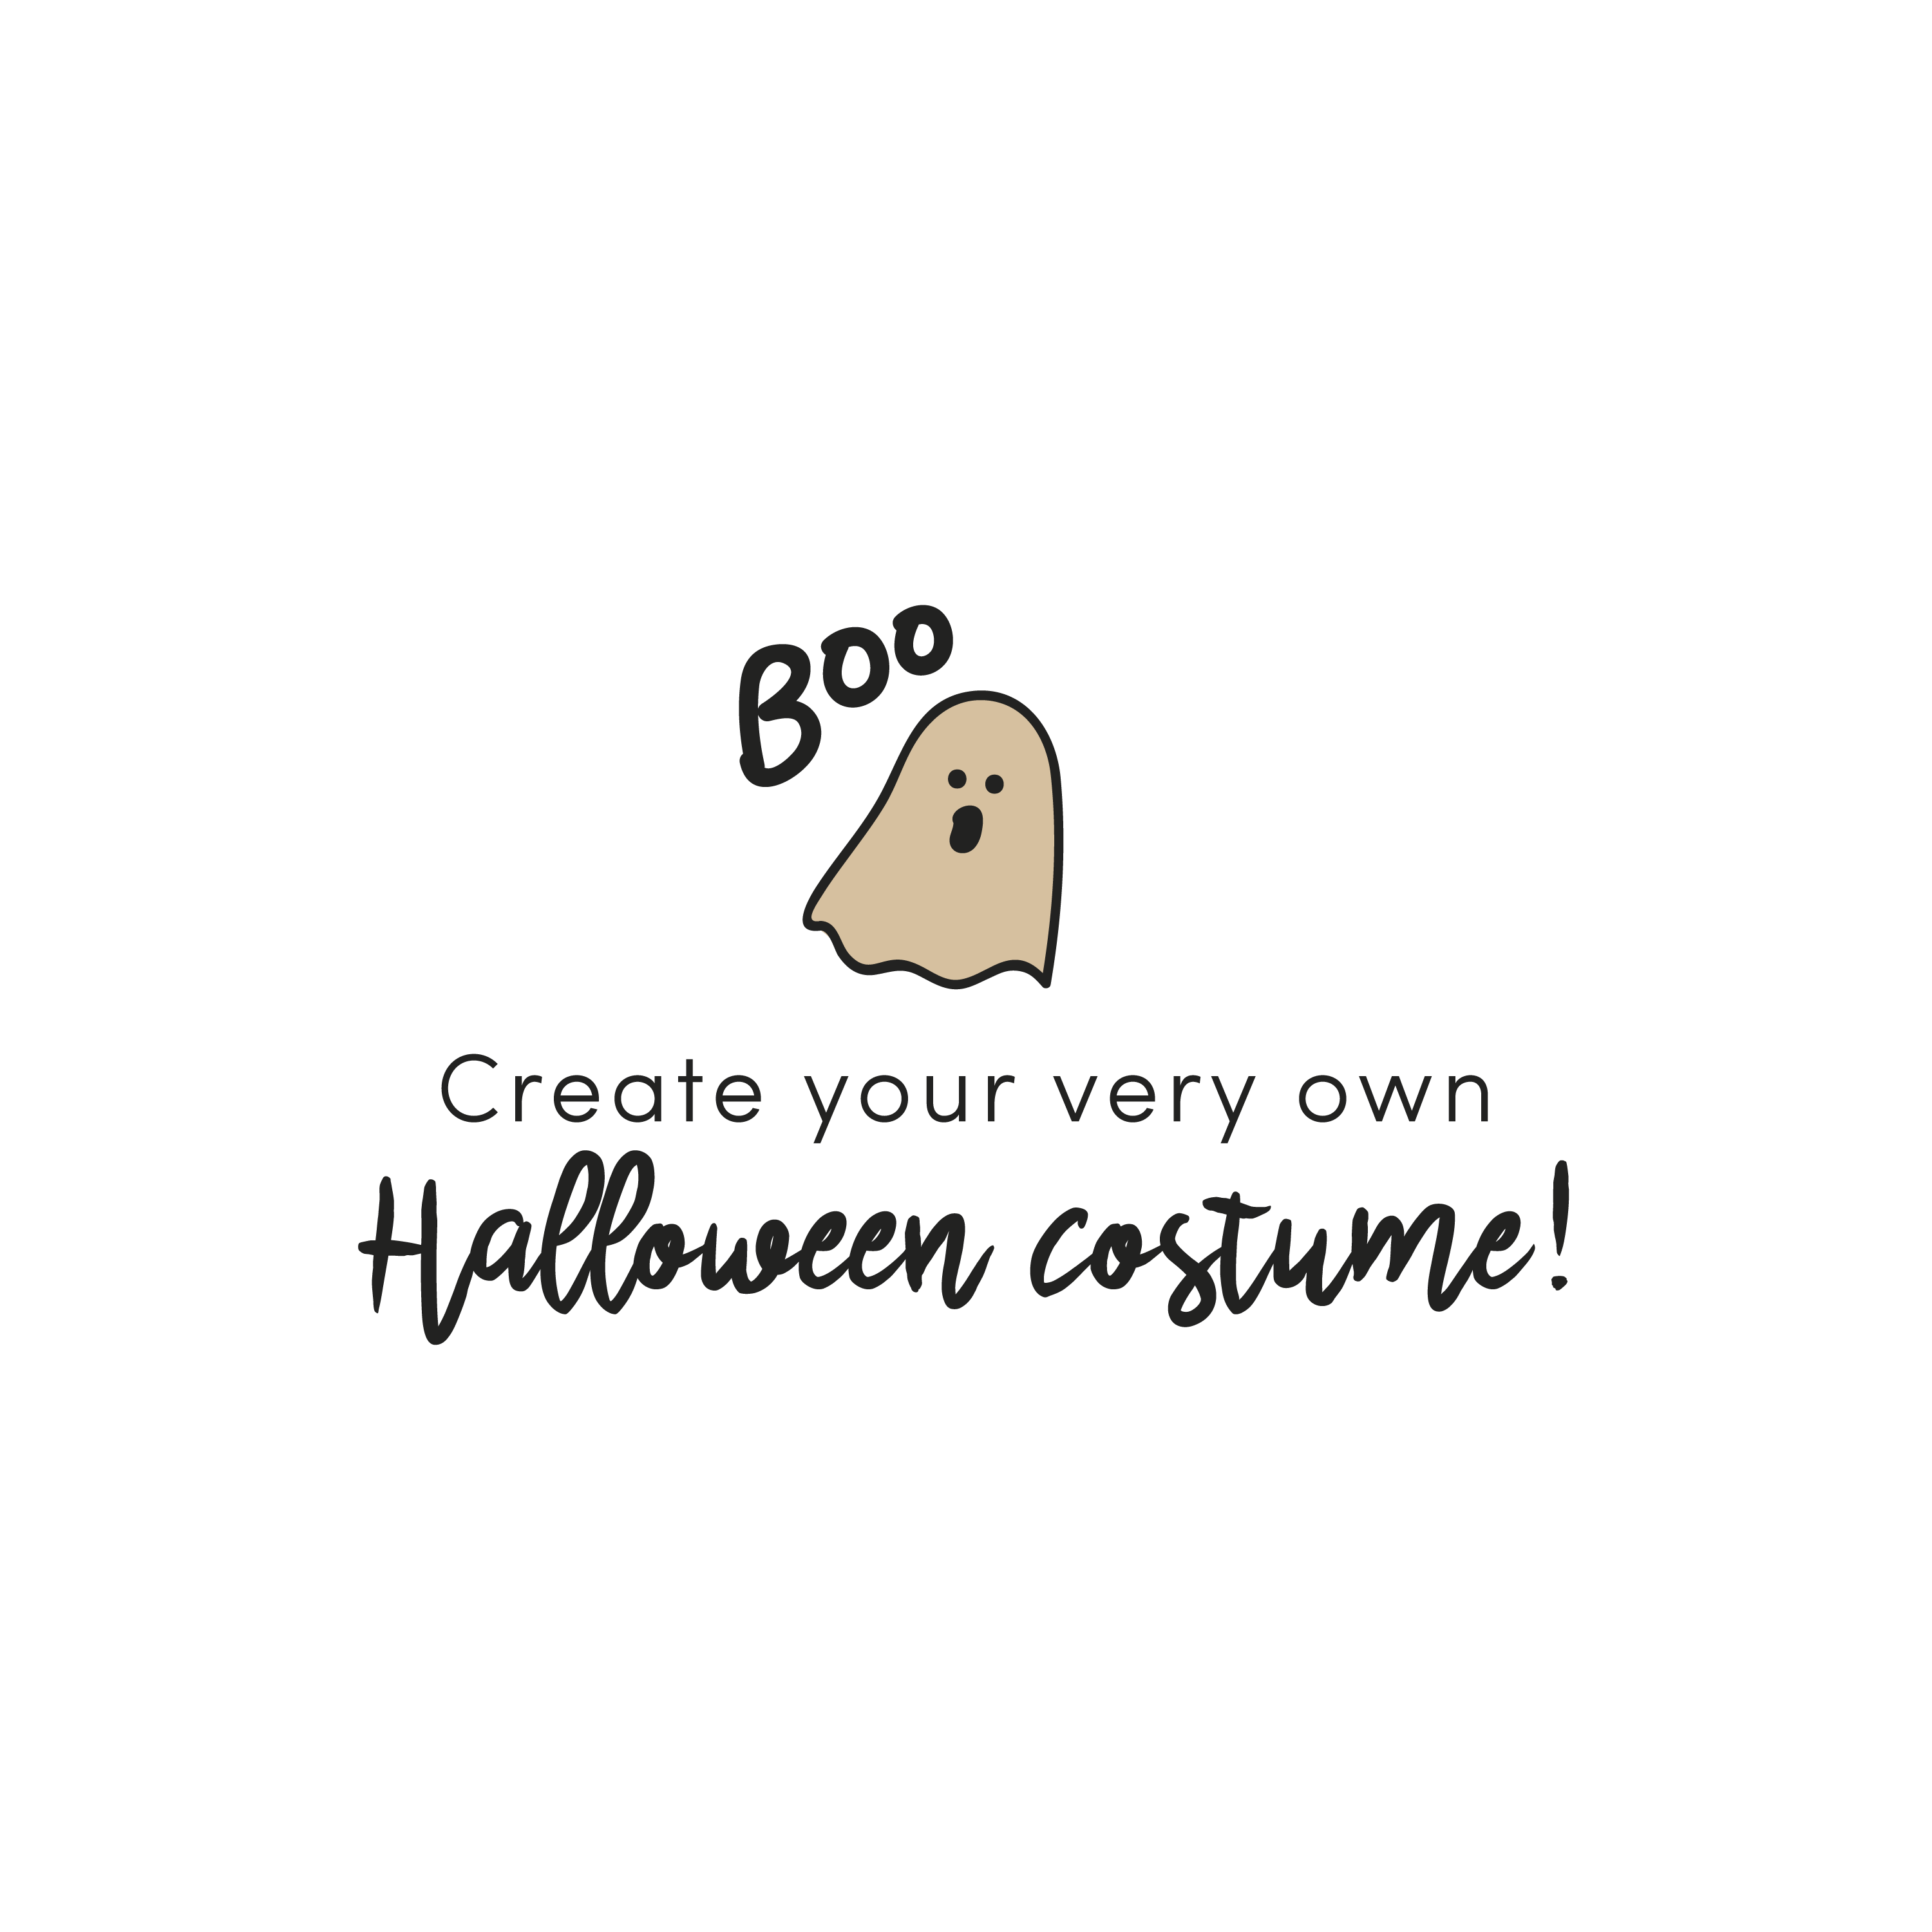 English version of the create your very own Halloween costume document to print made by Les Belles Combines